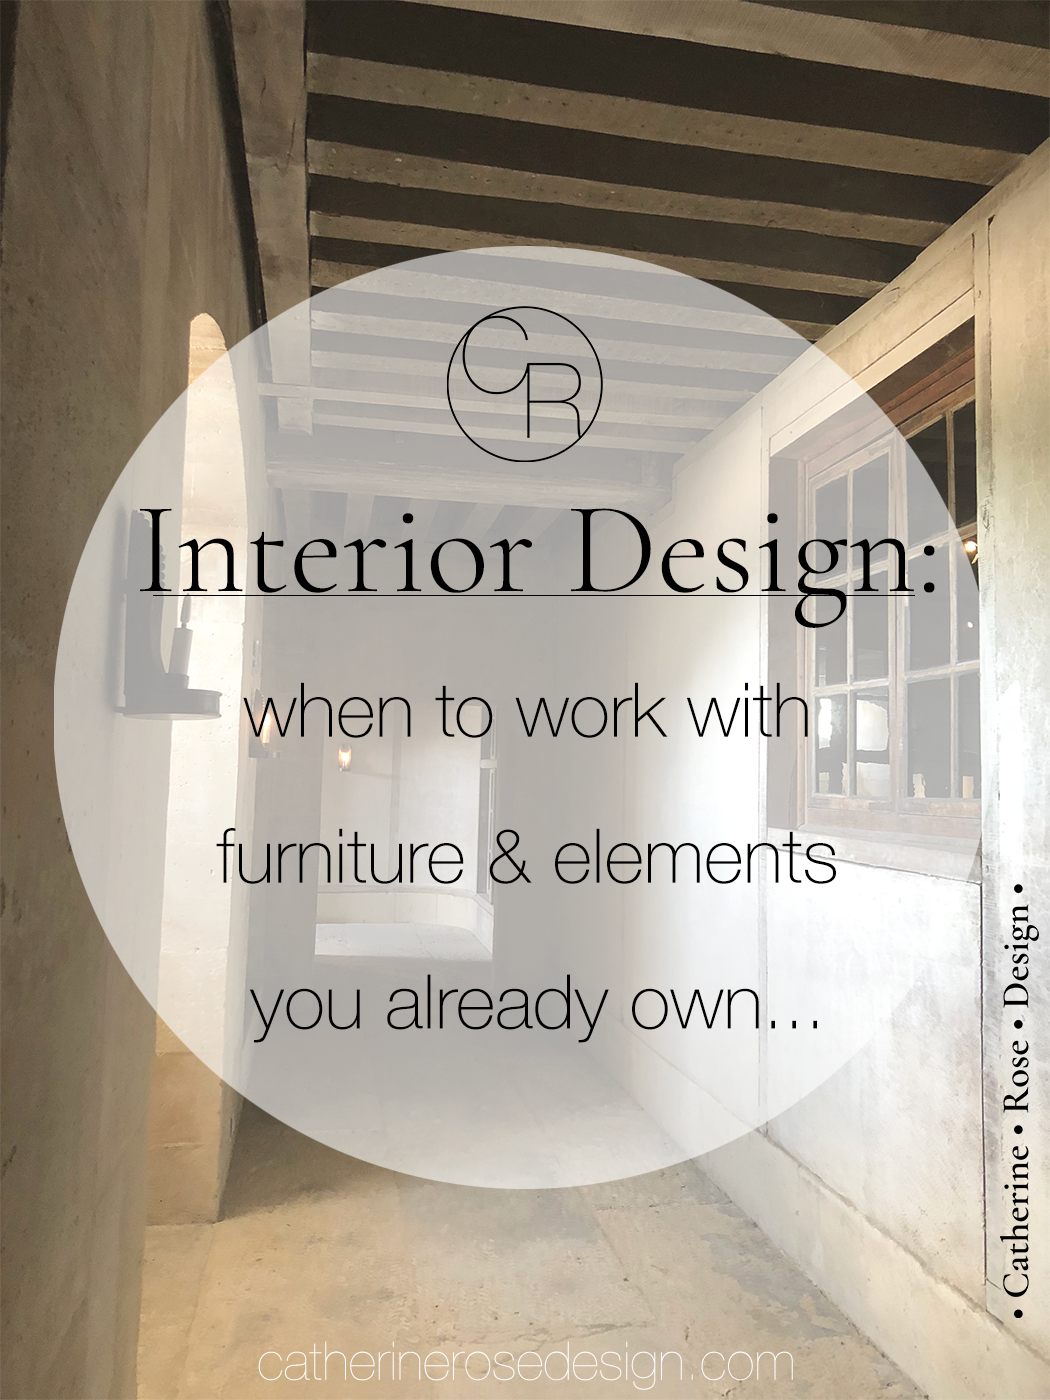 Interior Design: When to Work With What You Have (Copy) (Copy) (Copy) (Copy) (Copy) (Copy) (Copy) (Copy) (Copy) (Copy) (Copy) (Copy) (Copy) (Copy) (Copy) (Copy) (Copy) (Copy) (Copy) (Copy) (Cop (Copy)